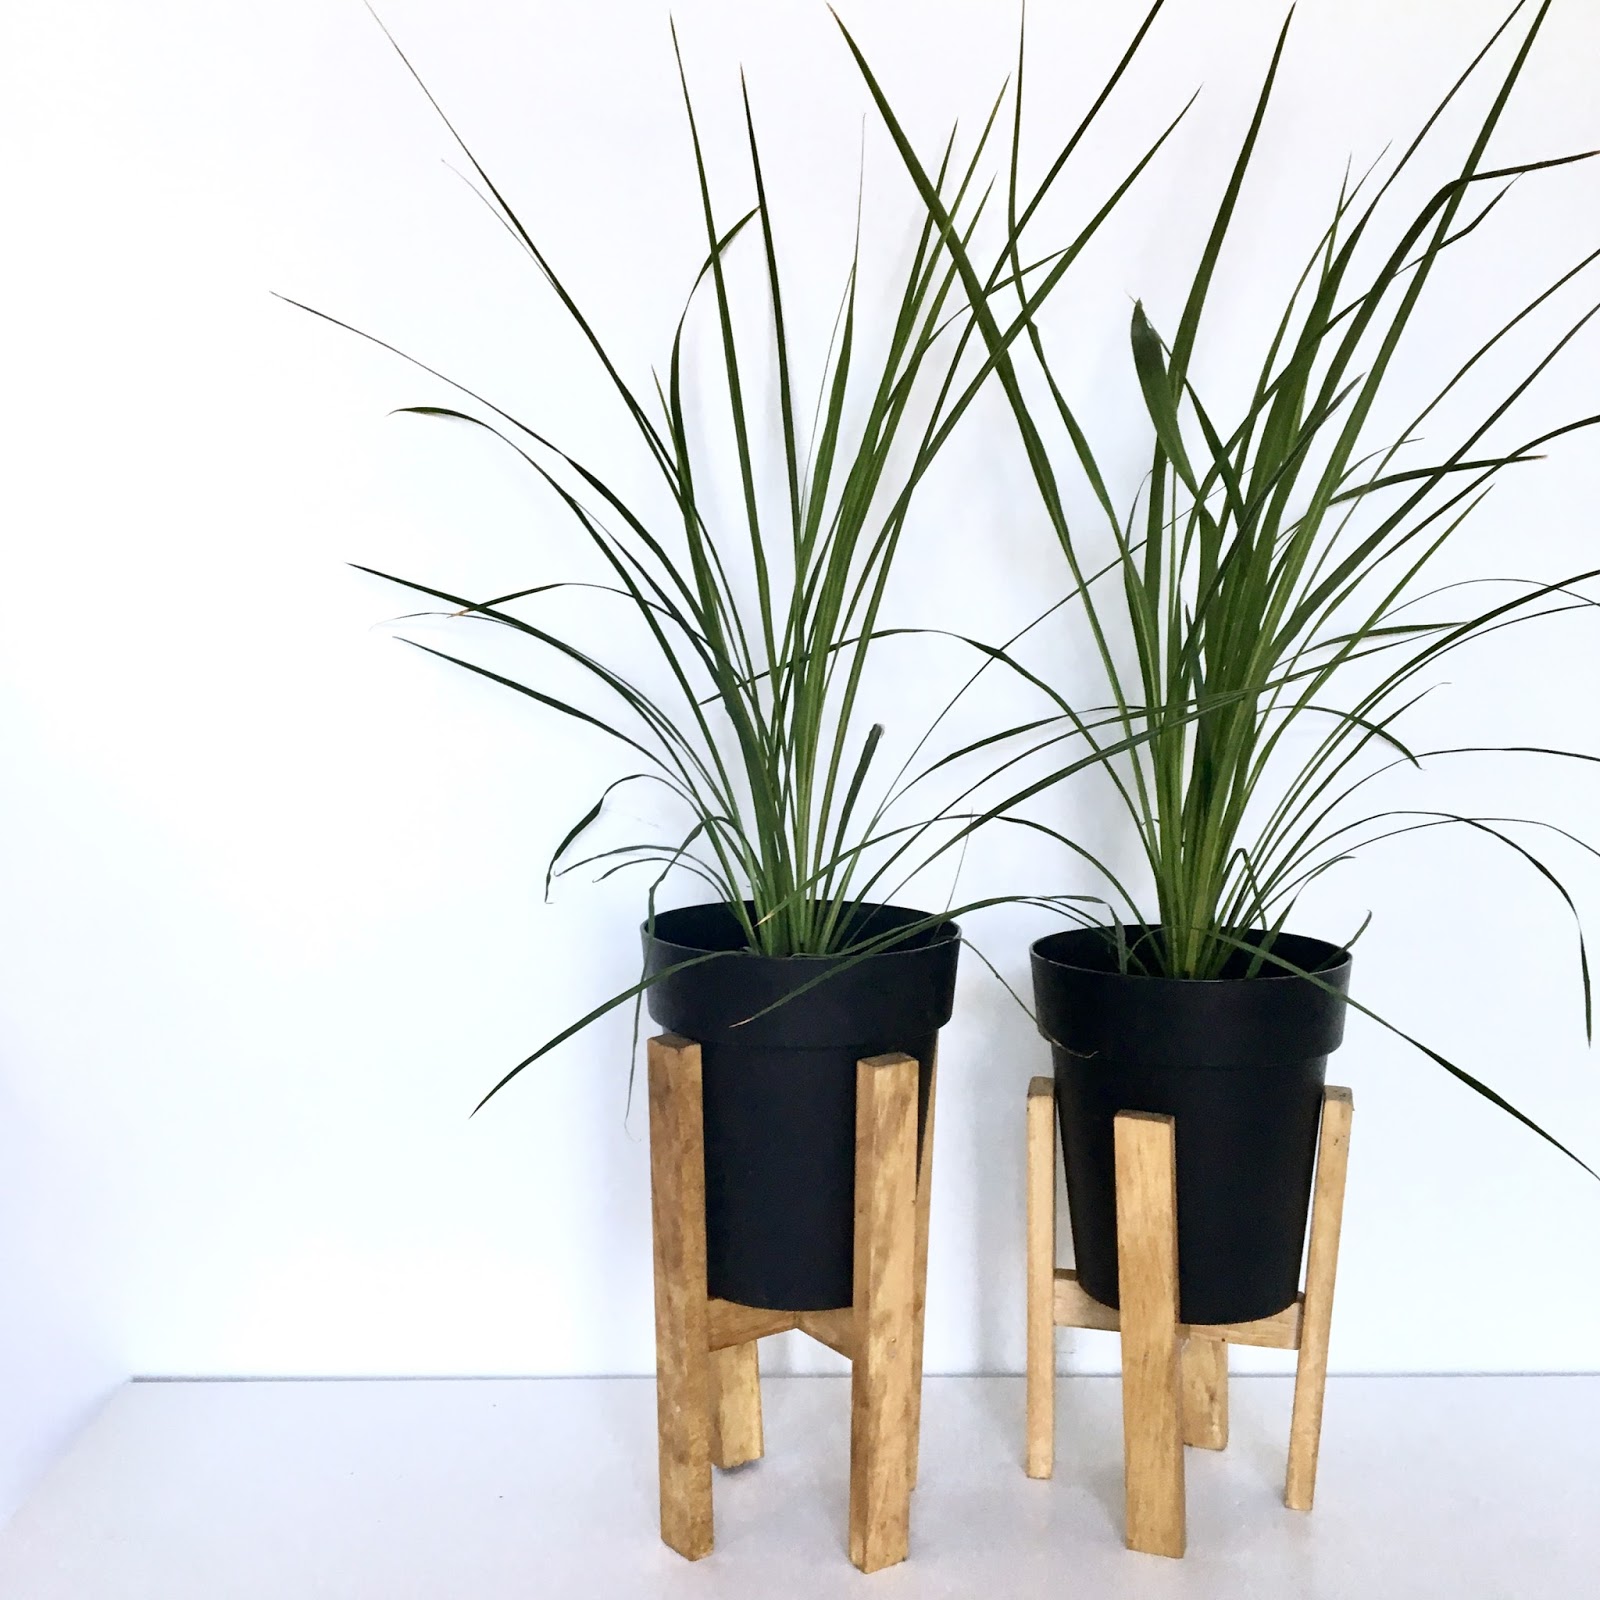 DIY Wooden Plant Stand